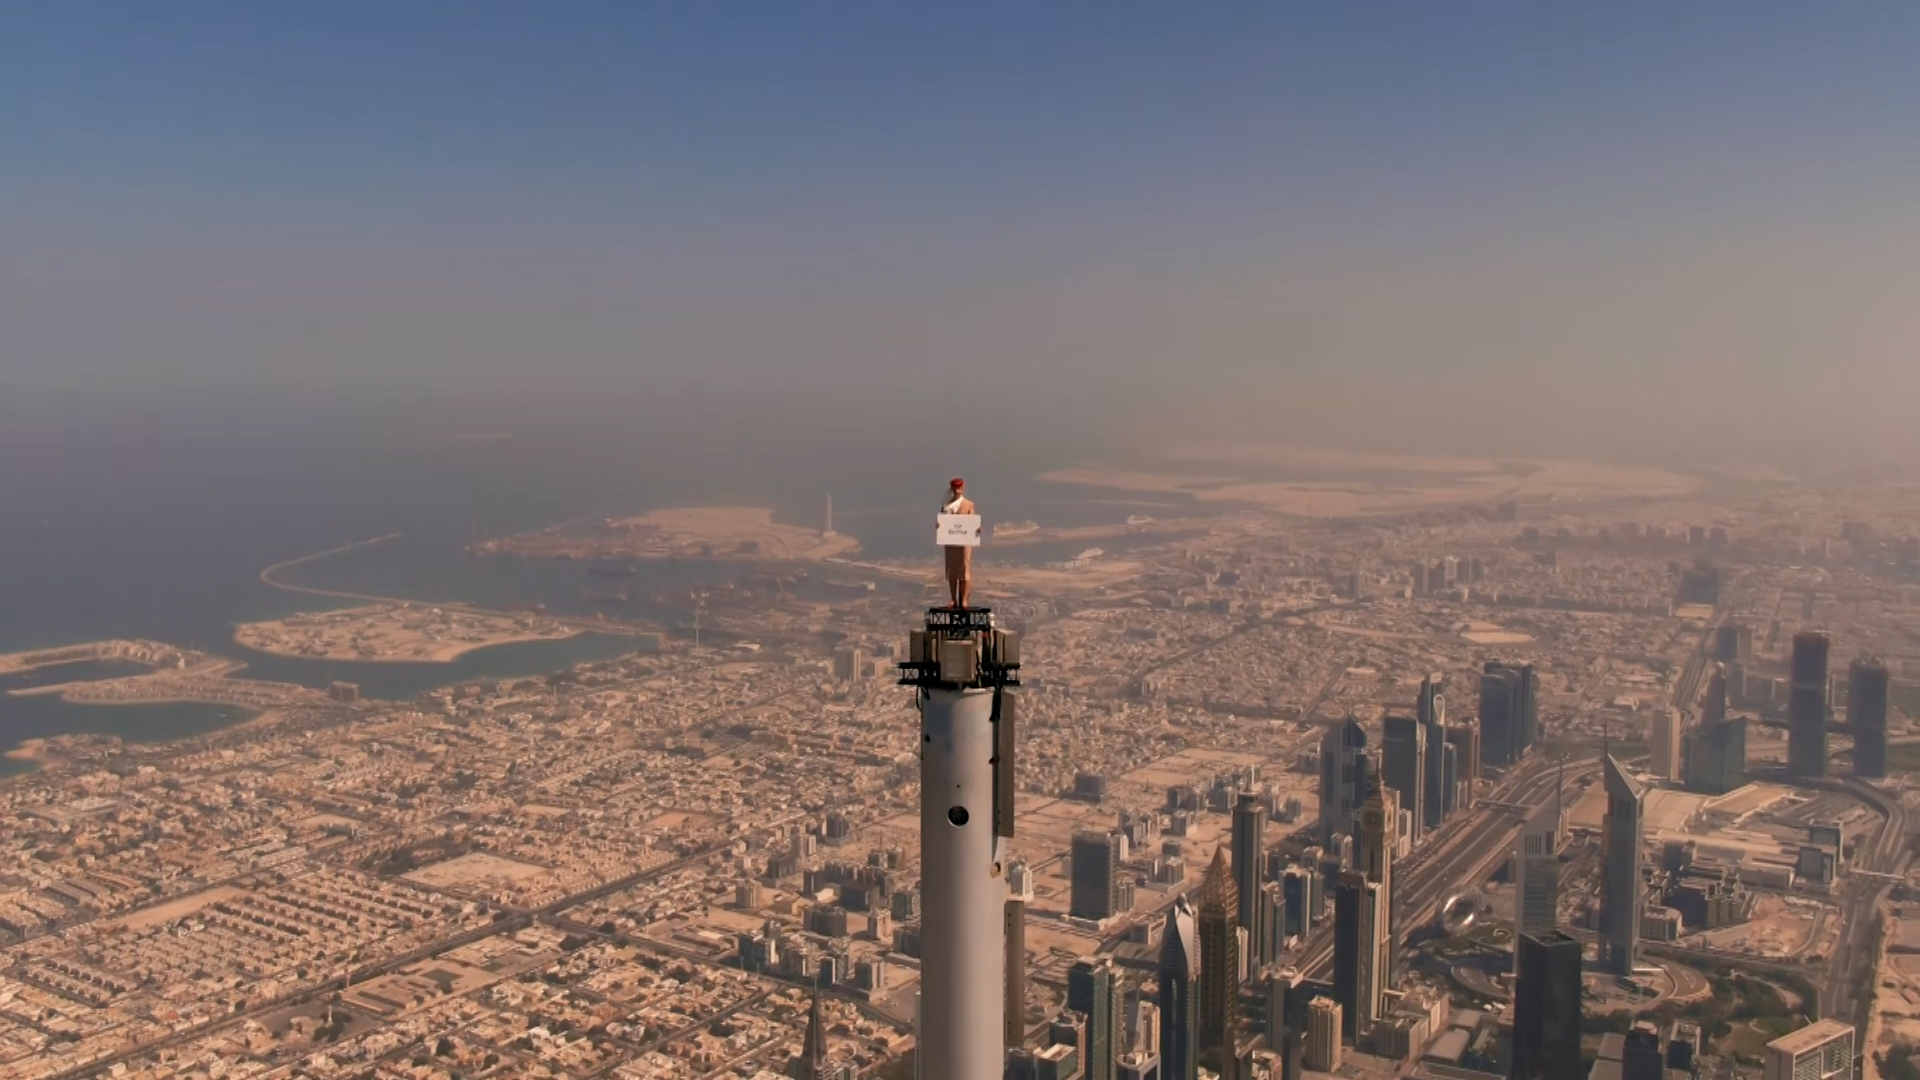 Emirates Cabin Crew on the tip of the Burj Khalifa by Emaar (Emirates photo)